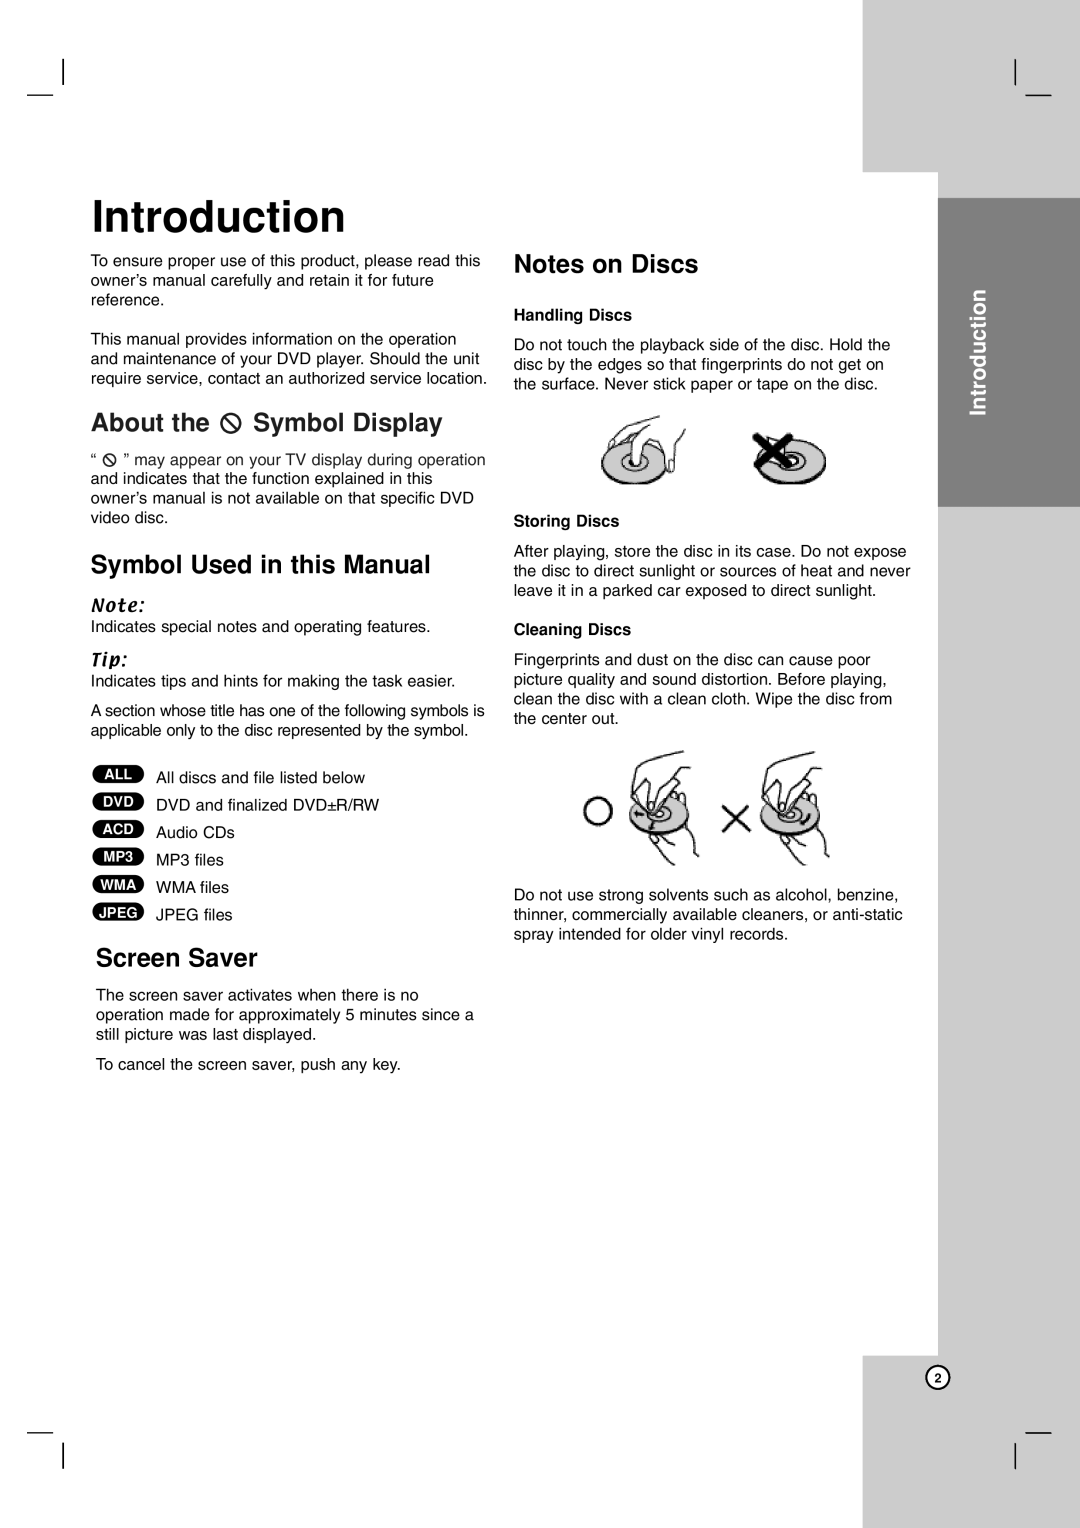 JVC THG31 Introduction, Symbol Used in this Manual, Screen Saver, Notes on Discs, Reference, Handling Discs, Storing Discs 